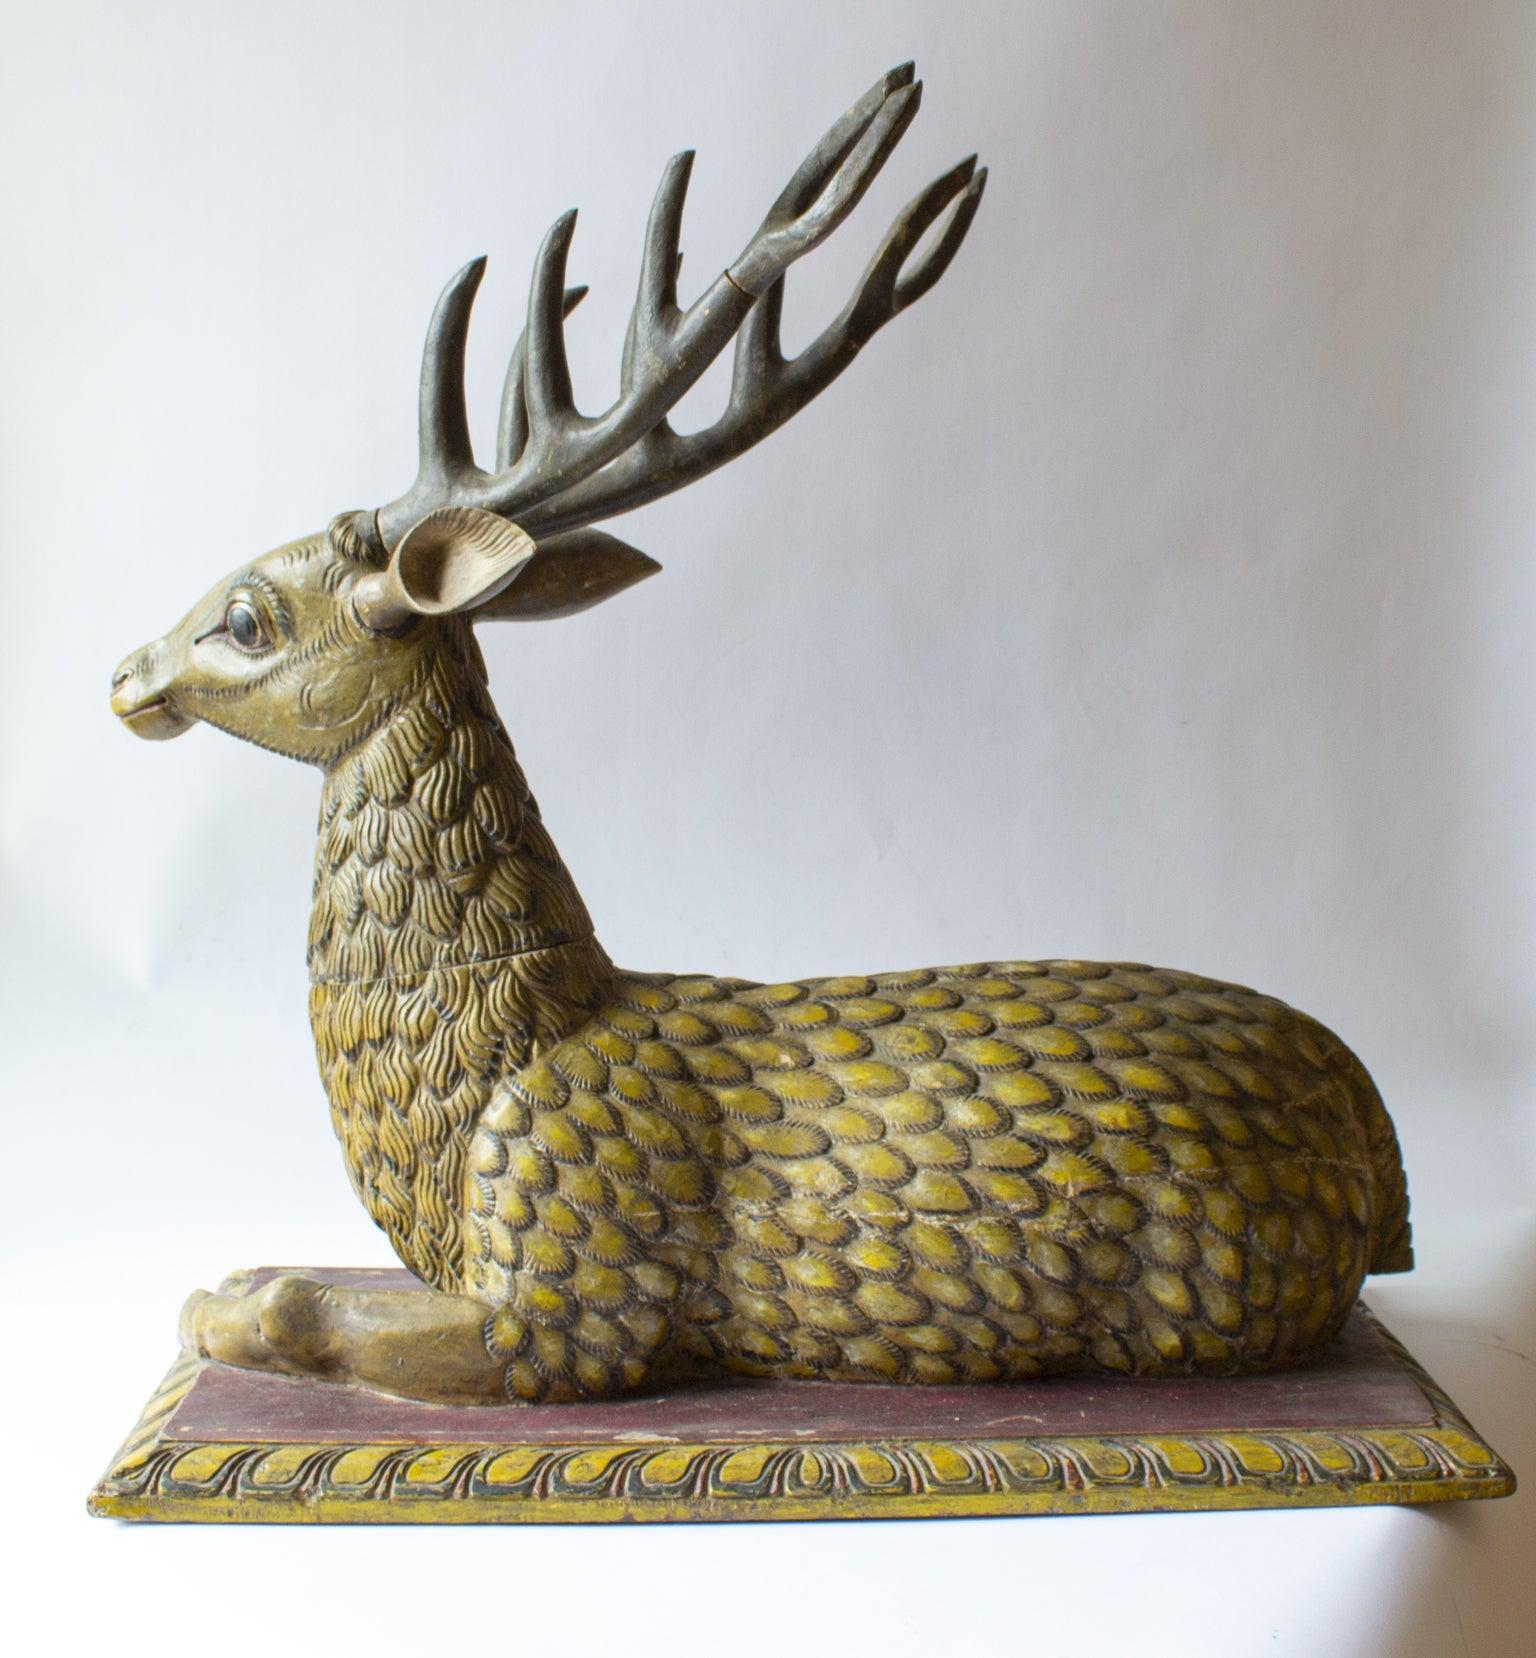 A big hand carved painted stag sculpture in wood, early 18th century. Pre-owned by a collector. This sculpture are one of a kind.

The stag deer are a symbol of spiritual authority, a deer stag is here depicted in all its magnificent elegance.